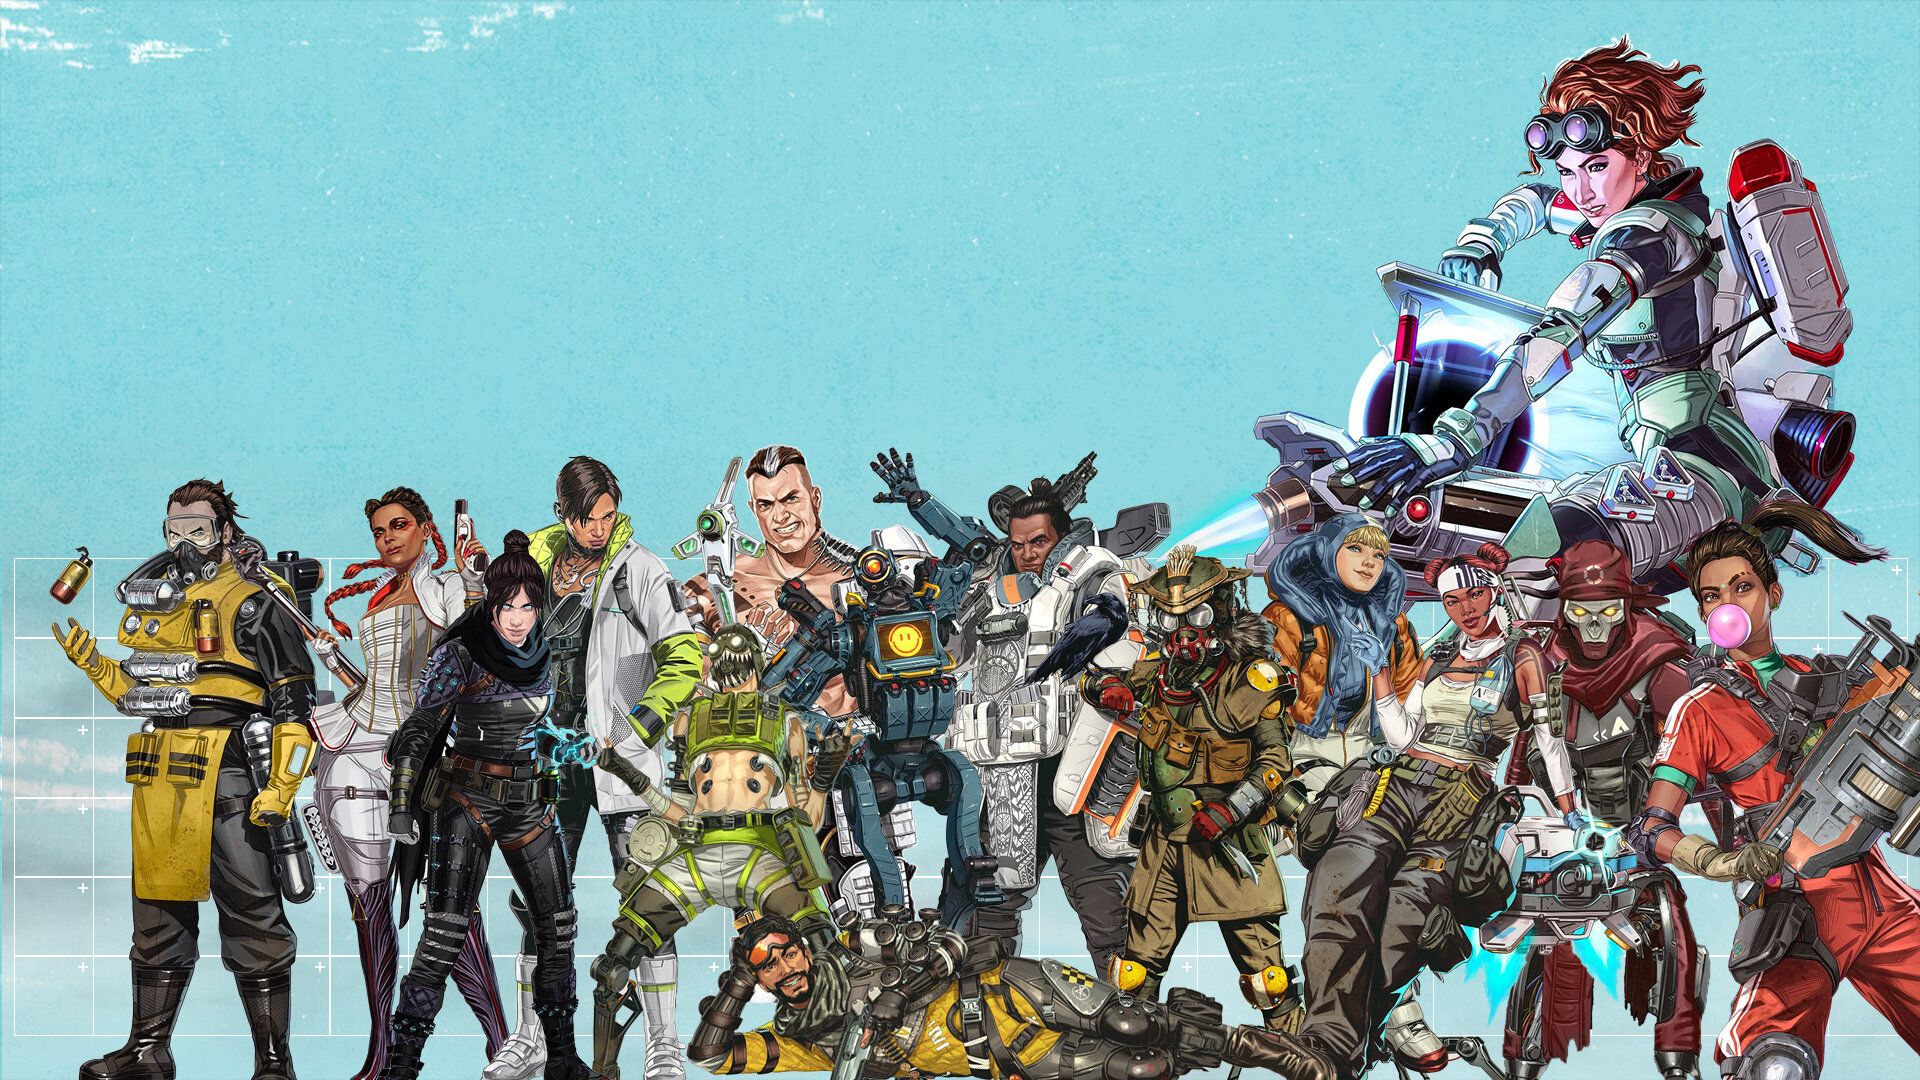 Season 7 Wallpaper Apex Legends New Legend Horizon Understands The Gravity Of The Situation And She S Sure To Give The Other Legends A Lift Granbodoque